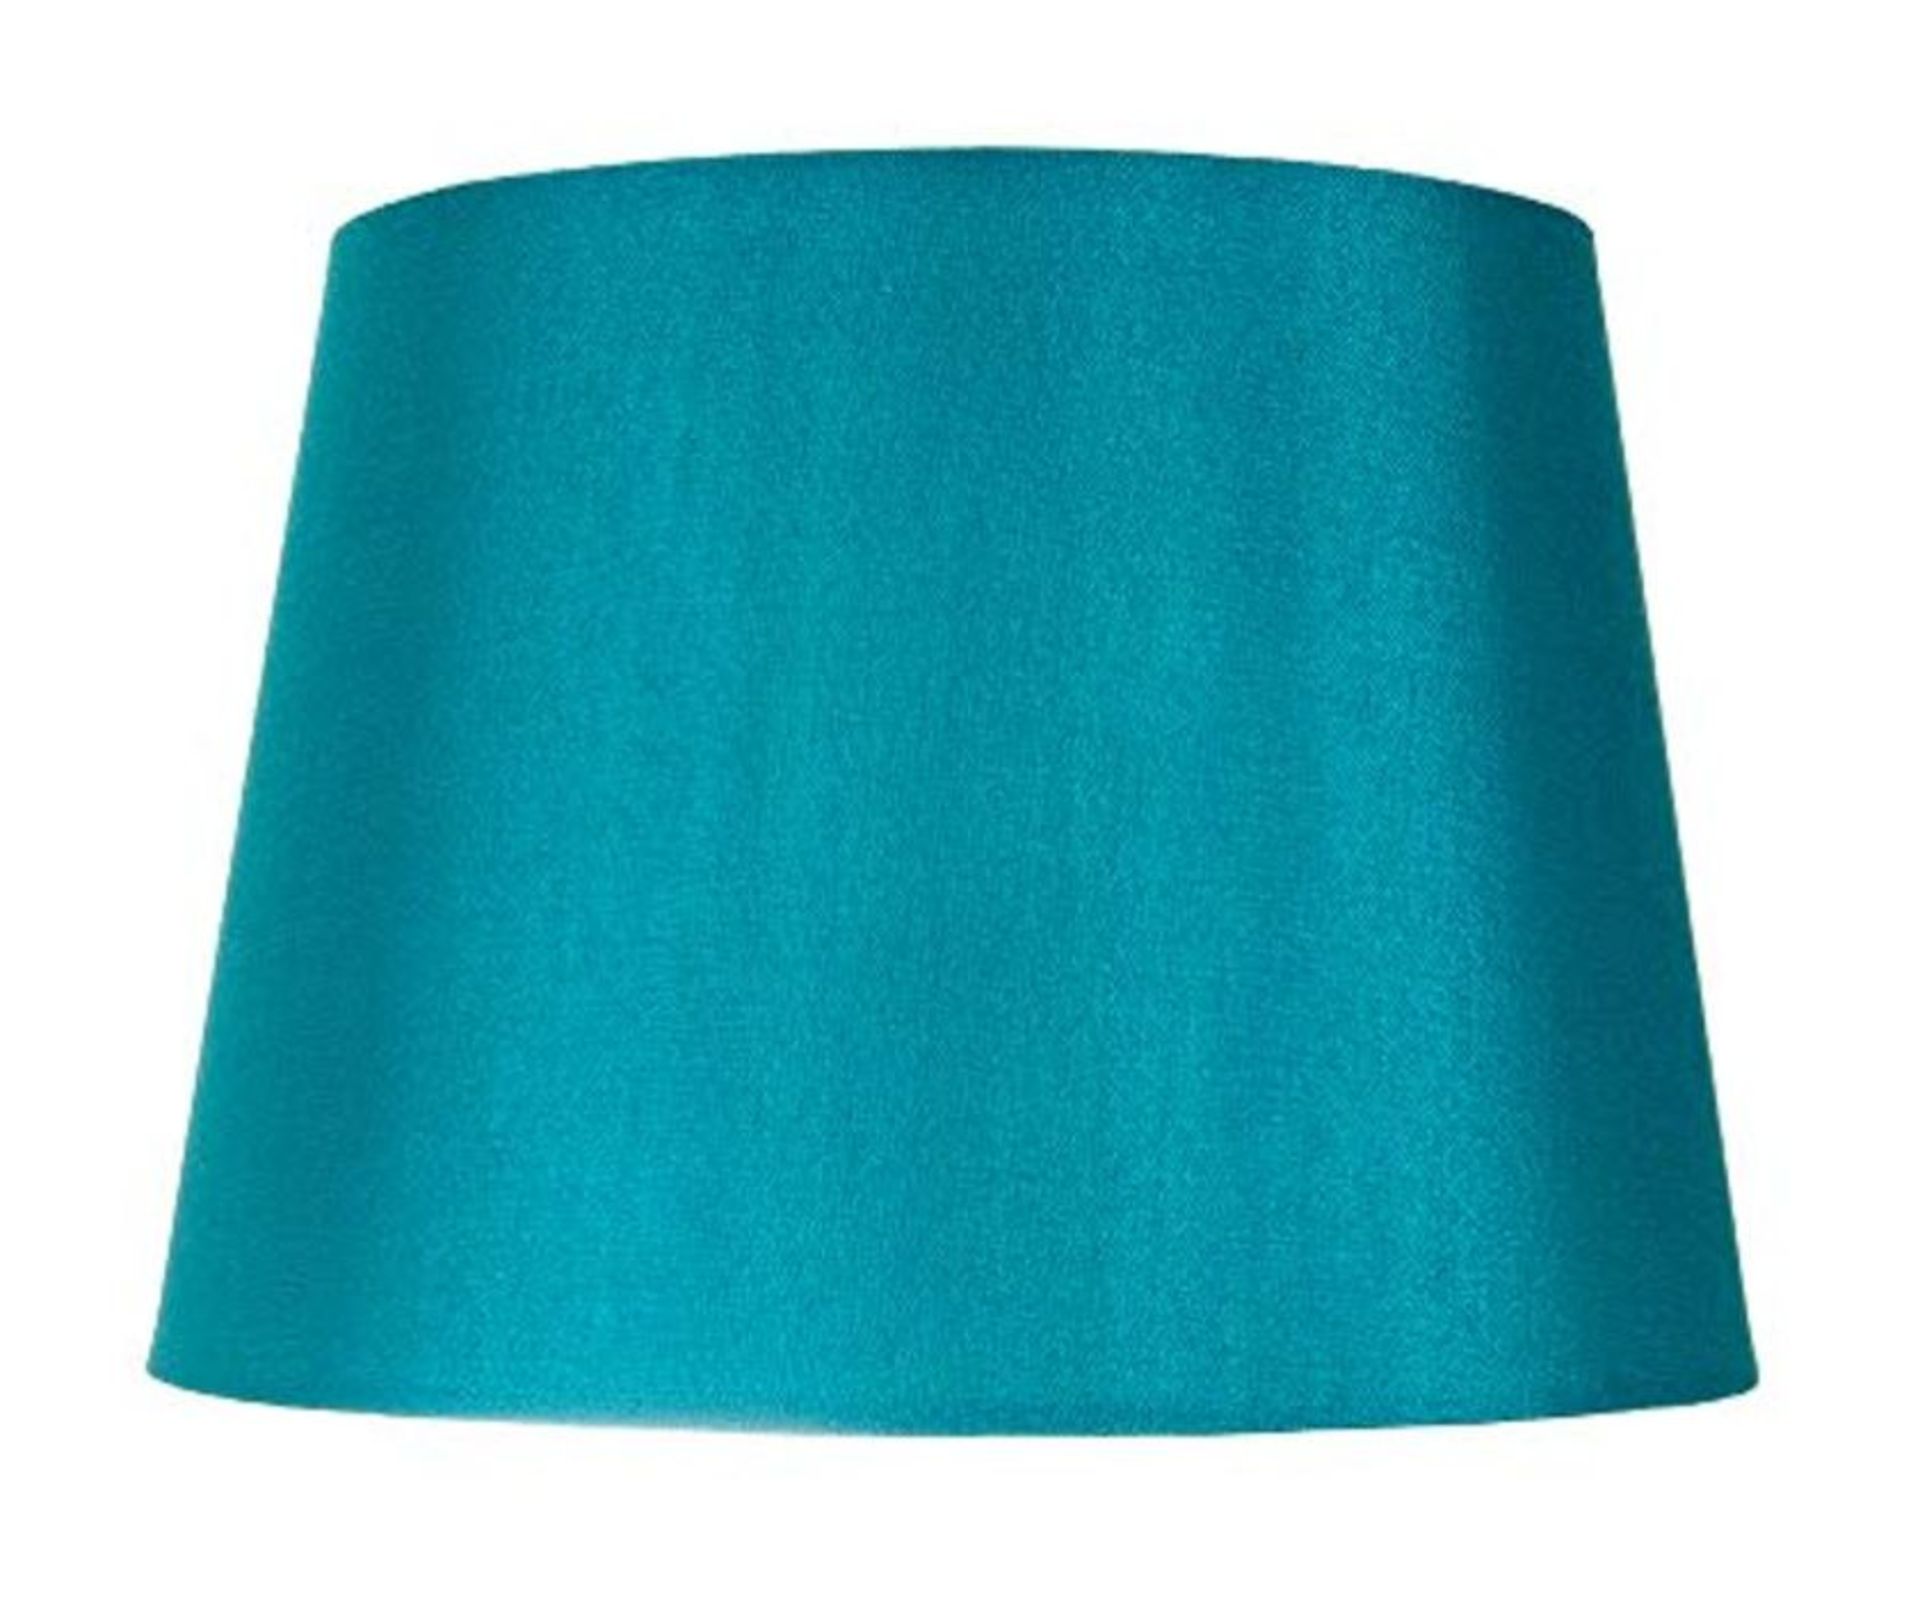 Traditionally Designed Medium 12" Lamp Shade in Teal Faux Silk Fabric | 60w Max | 30cm